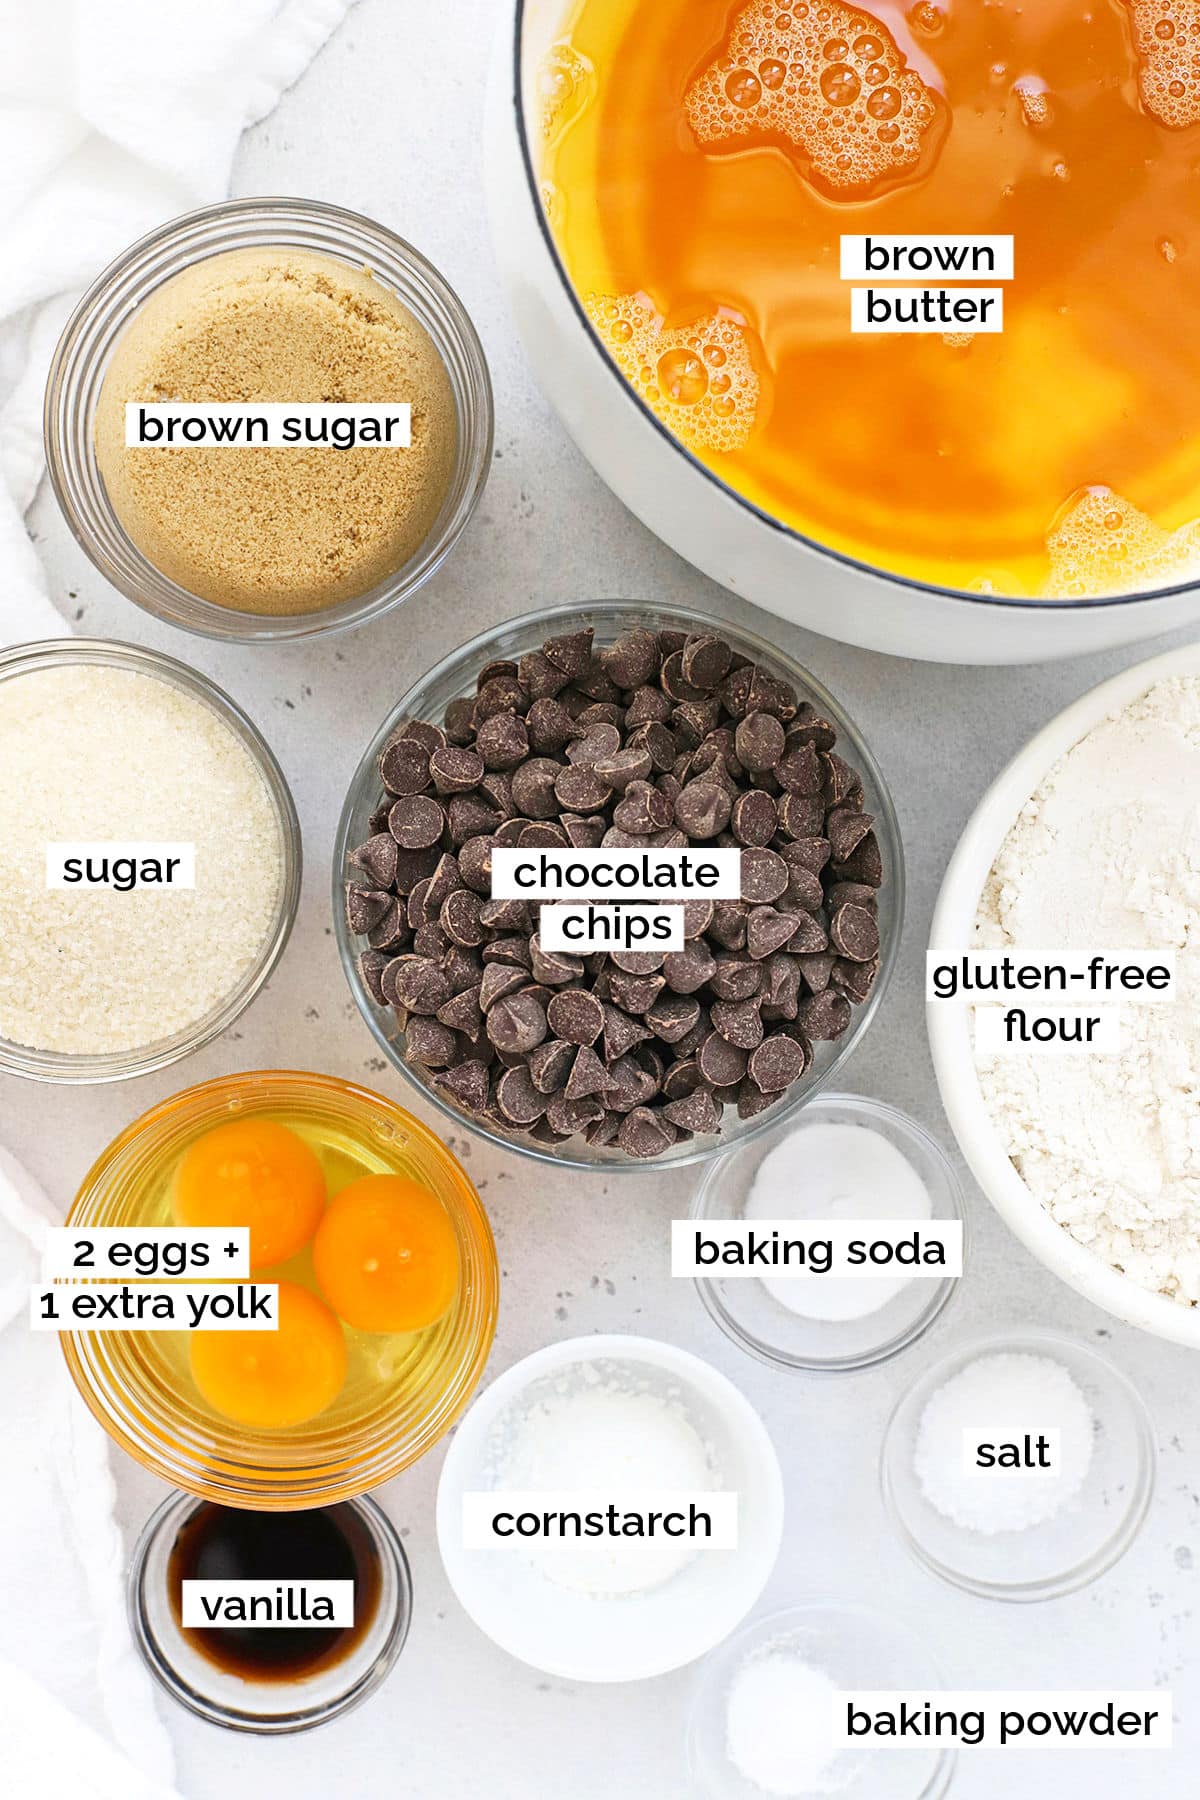 ingredients for gluten-free brown butter chocolate chip cookies